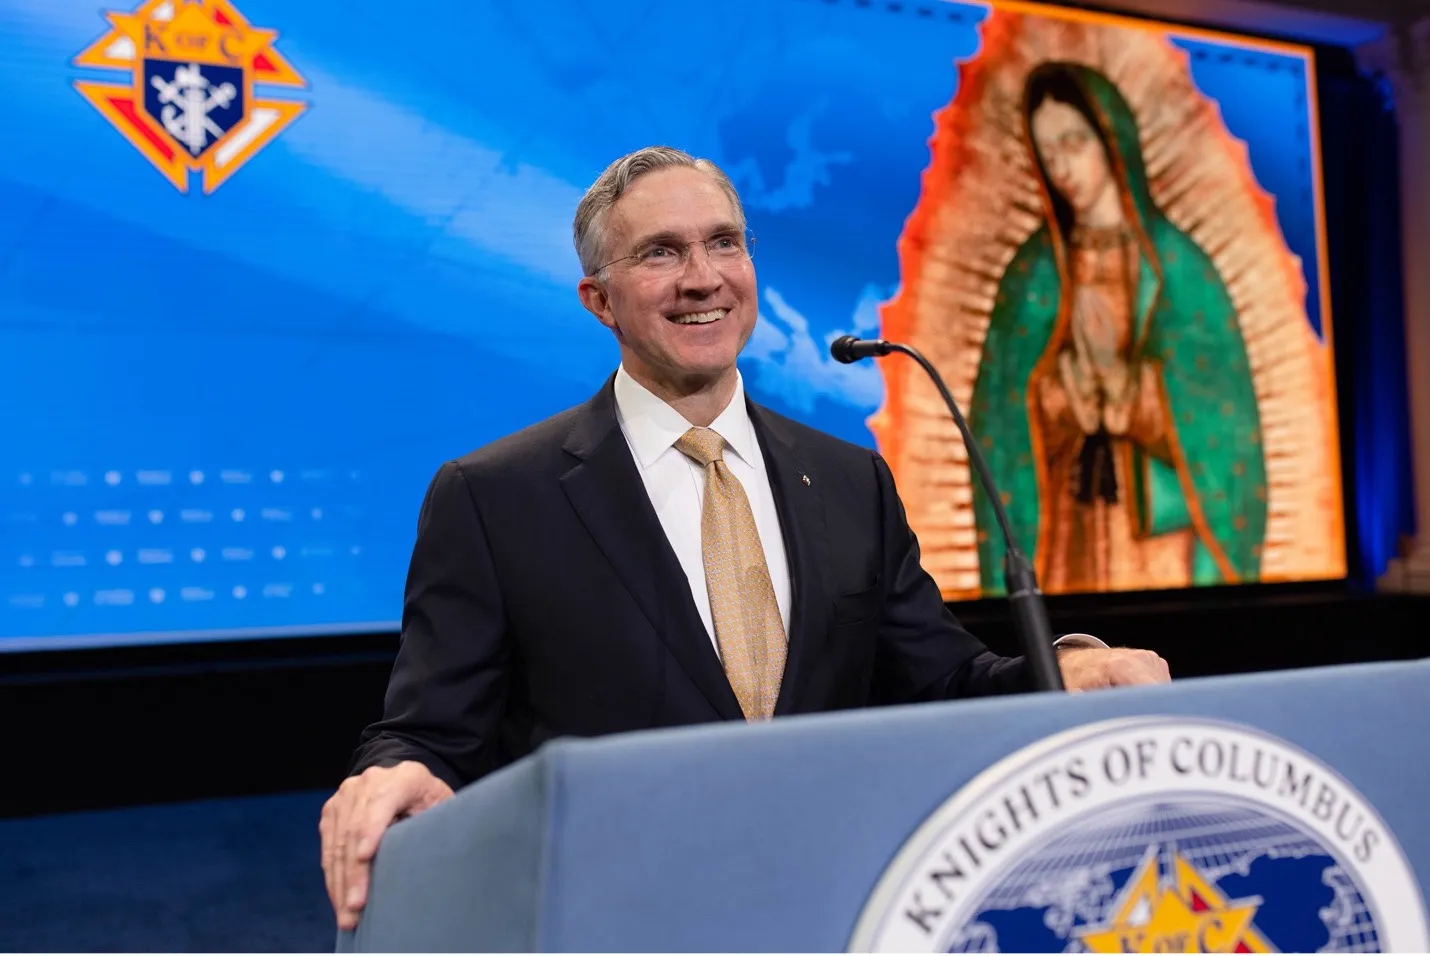 Supreme Knight Patrick Kelly delivers his first in-person annual report since assuming office in 2021 on Aug. 2, 2022, at the Knights of Columbus' annual convention held in Nashville, Tennessee.?w=200&h=150